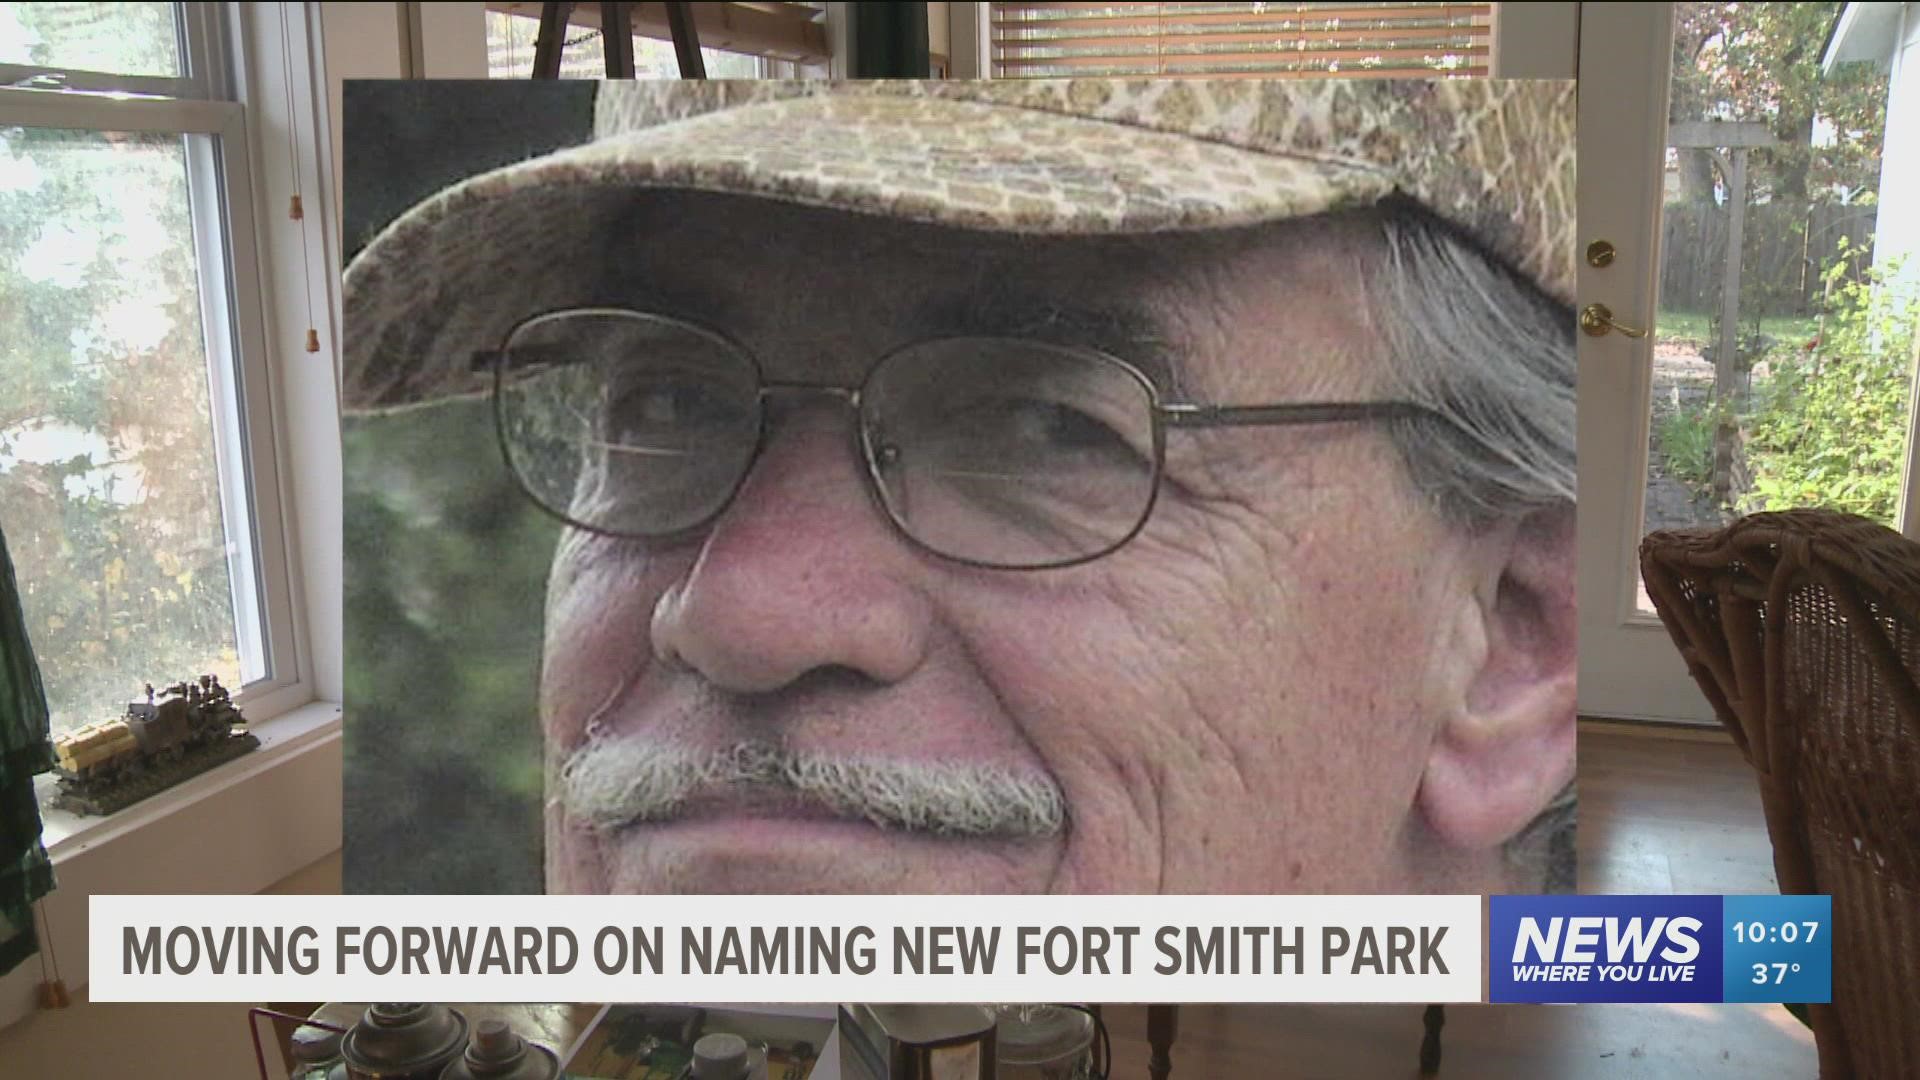 The Fort Smith Parks and Recreation Commission is moving forward naming the new Fort Smith sports fields after John Bell Jr.